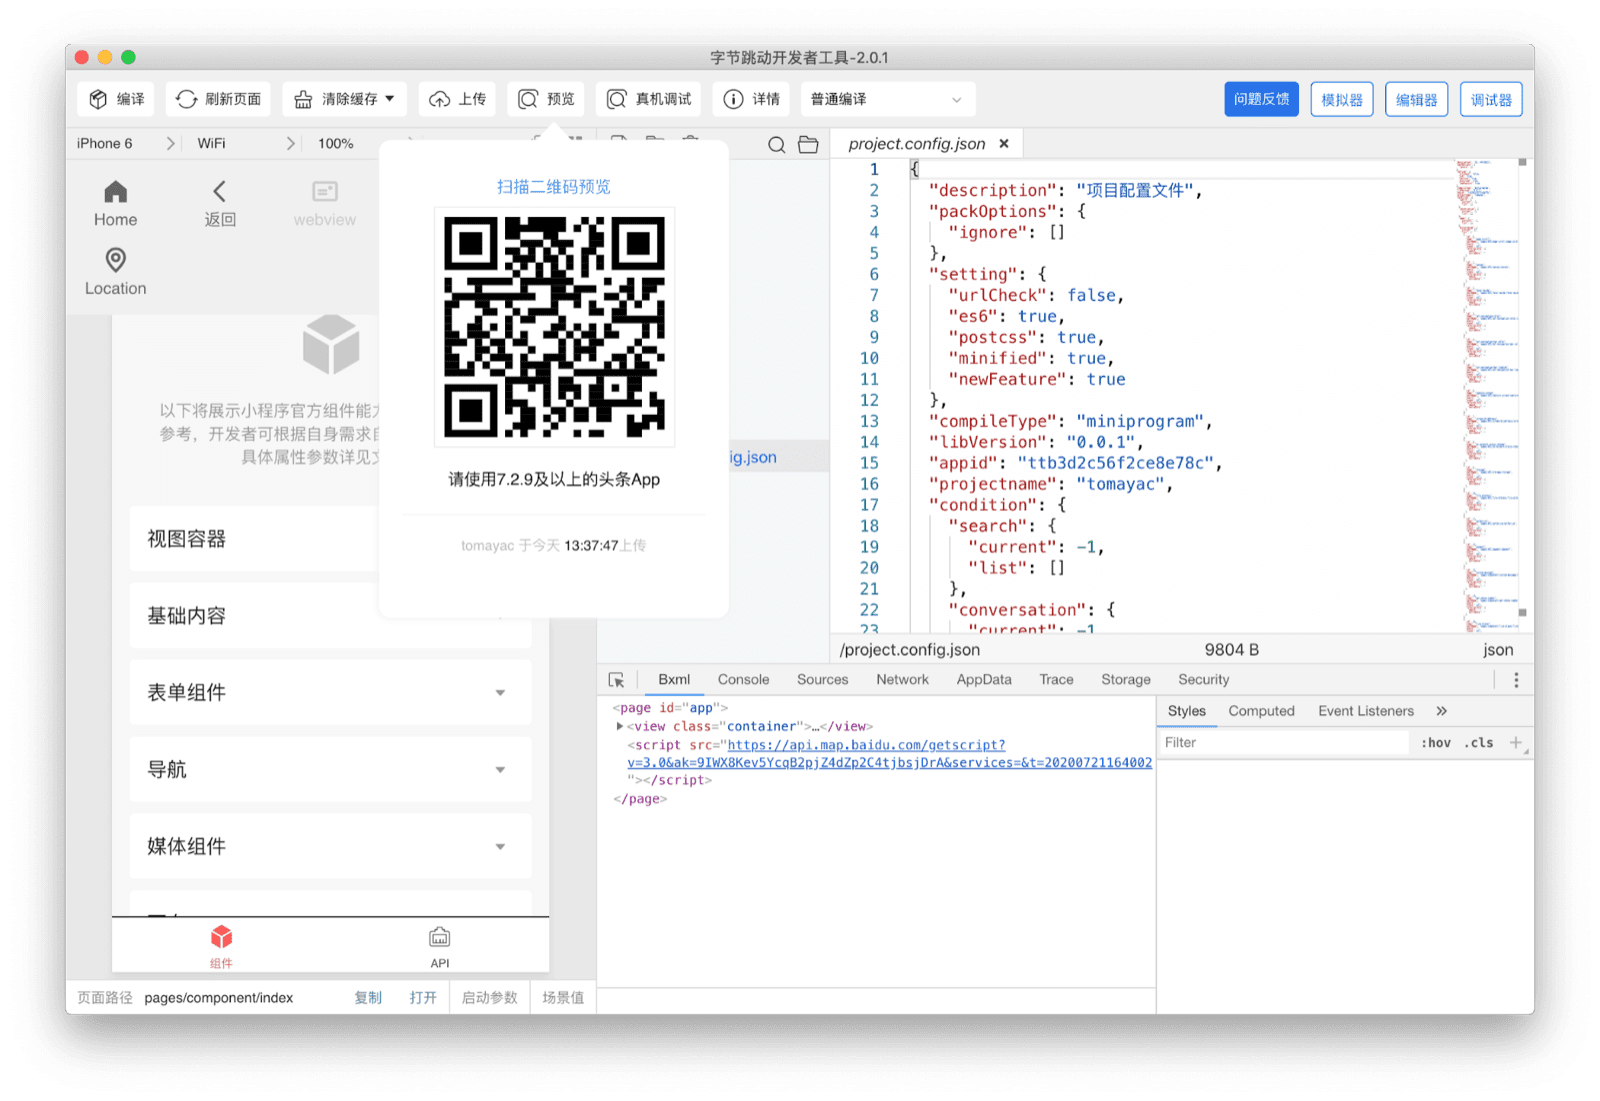 ByteDance DevTools showing a QR code that the user can scan with the Douyin app to see the current mini app on their device.